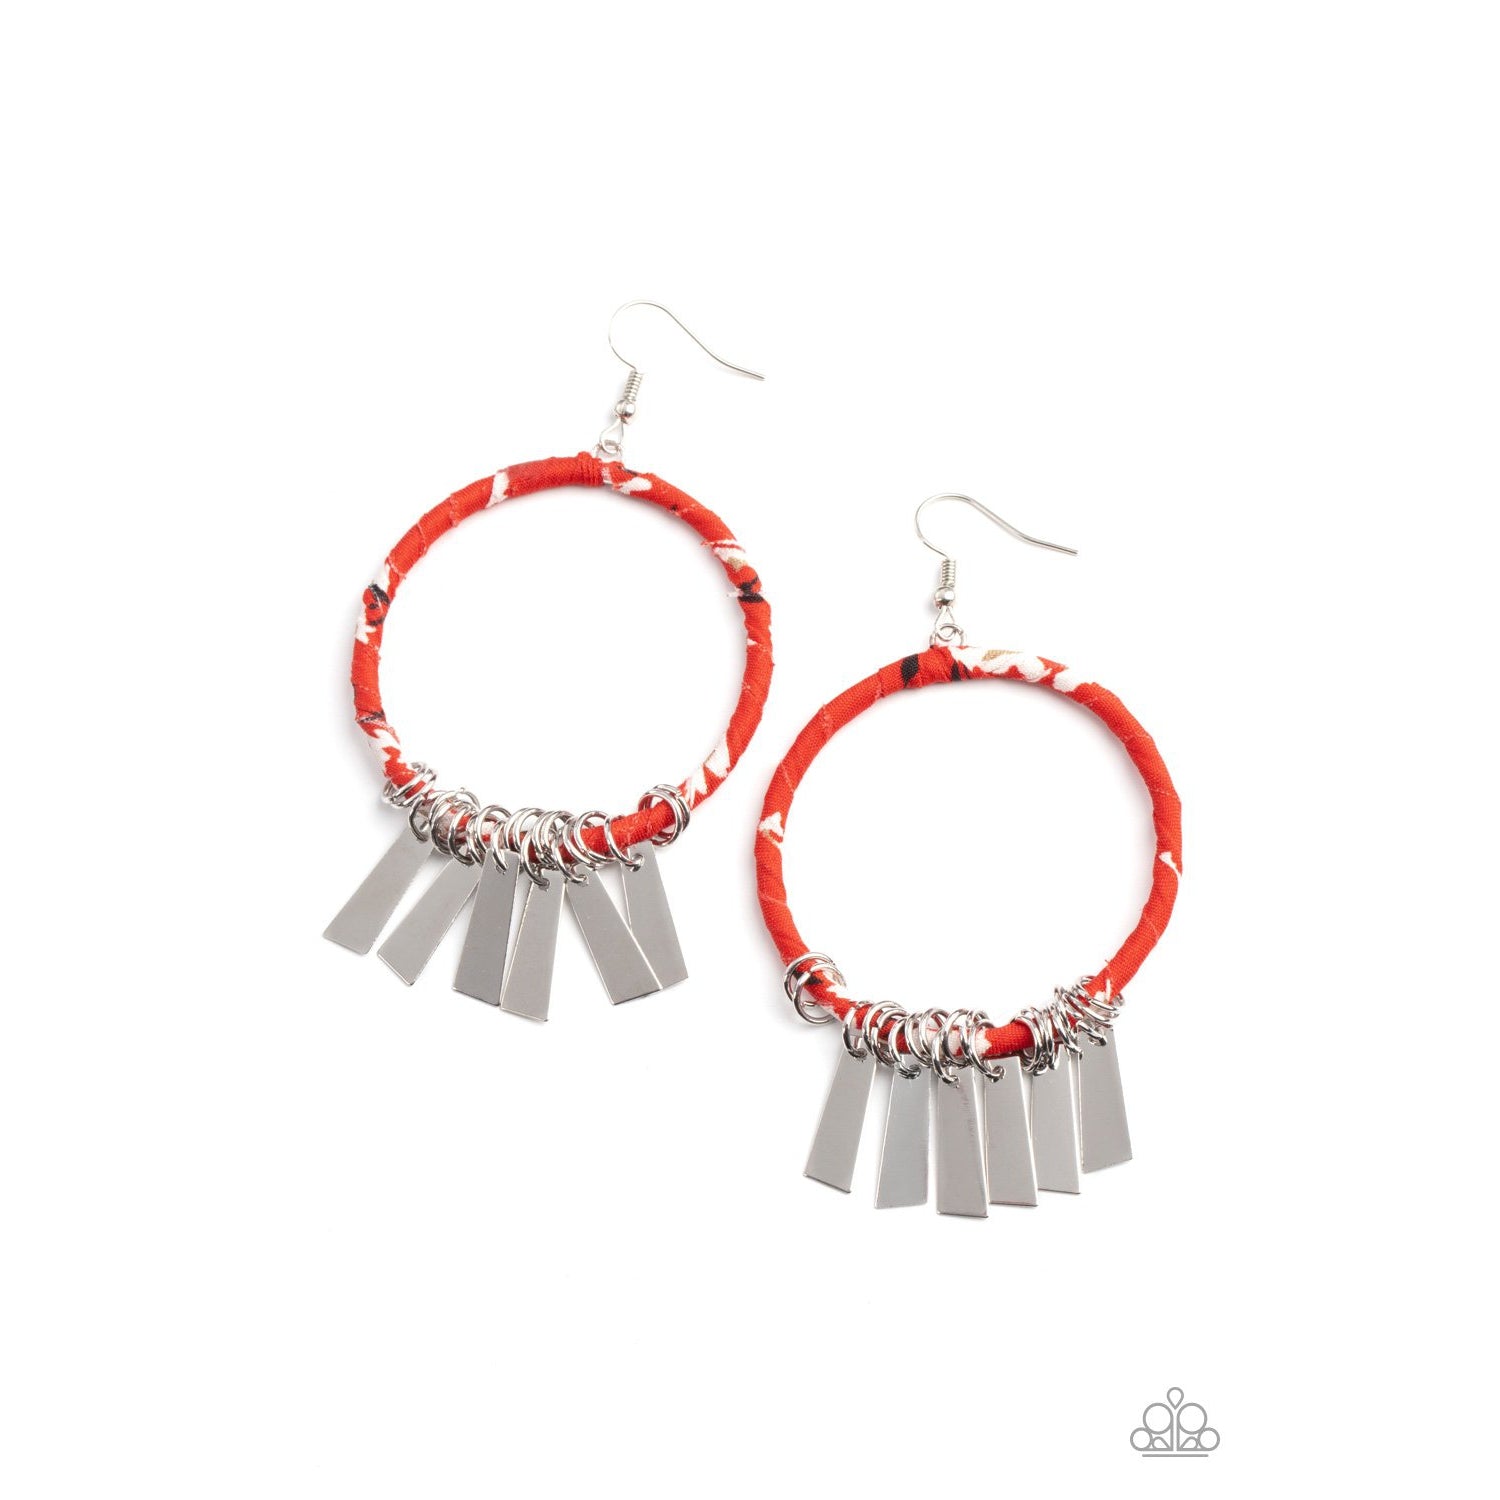 Garden Chimes - Red Fringe Earrings - Paparazzi Accessories - GlaMarous Titi Jewels